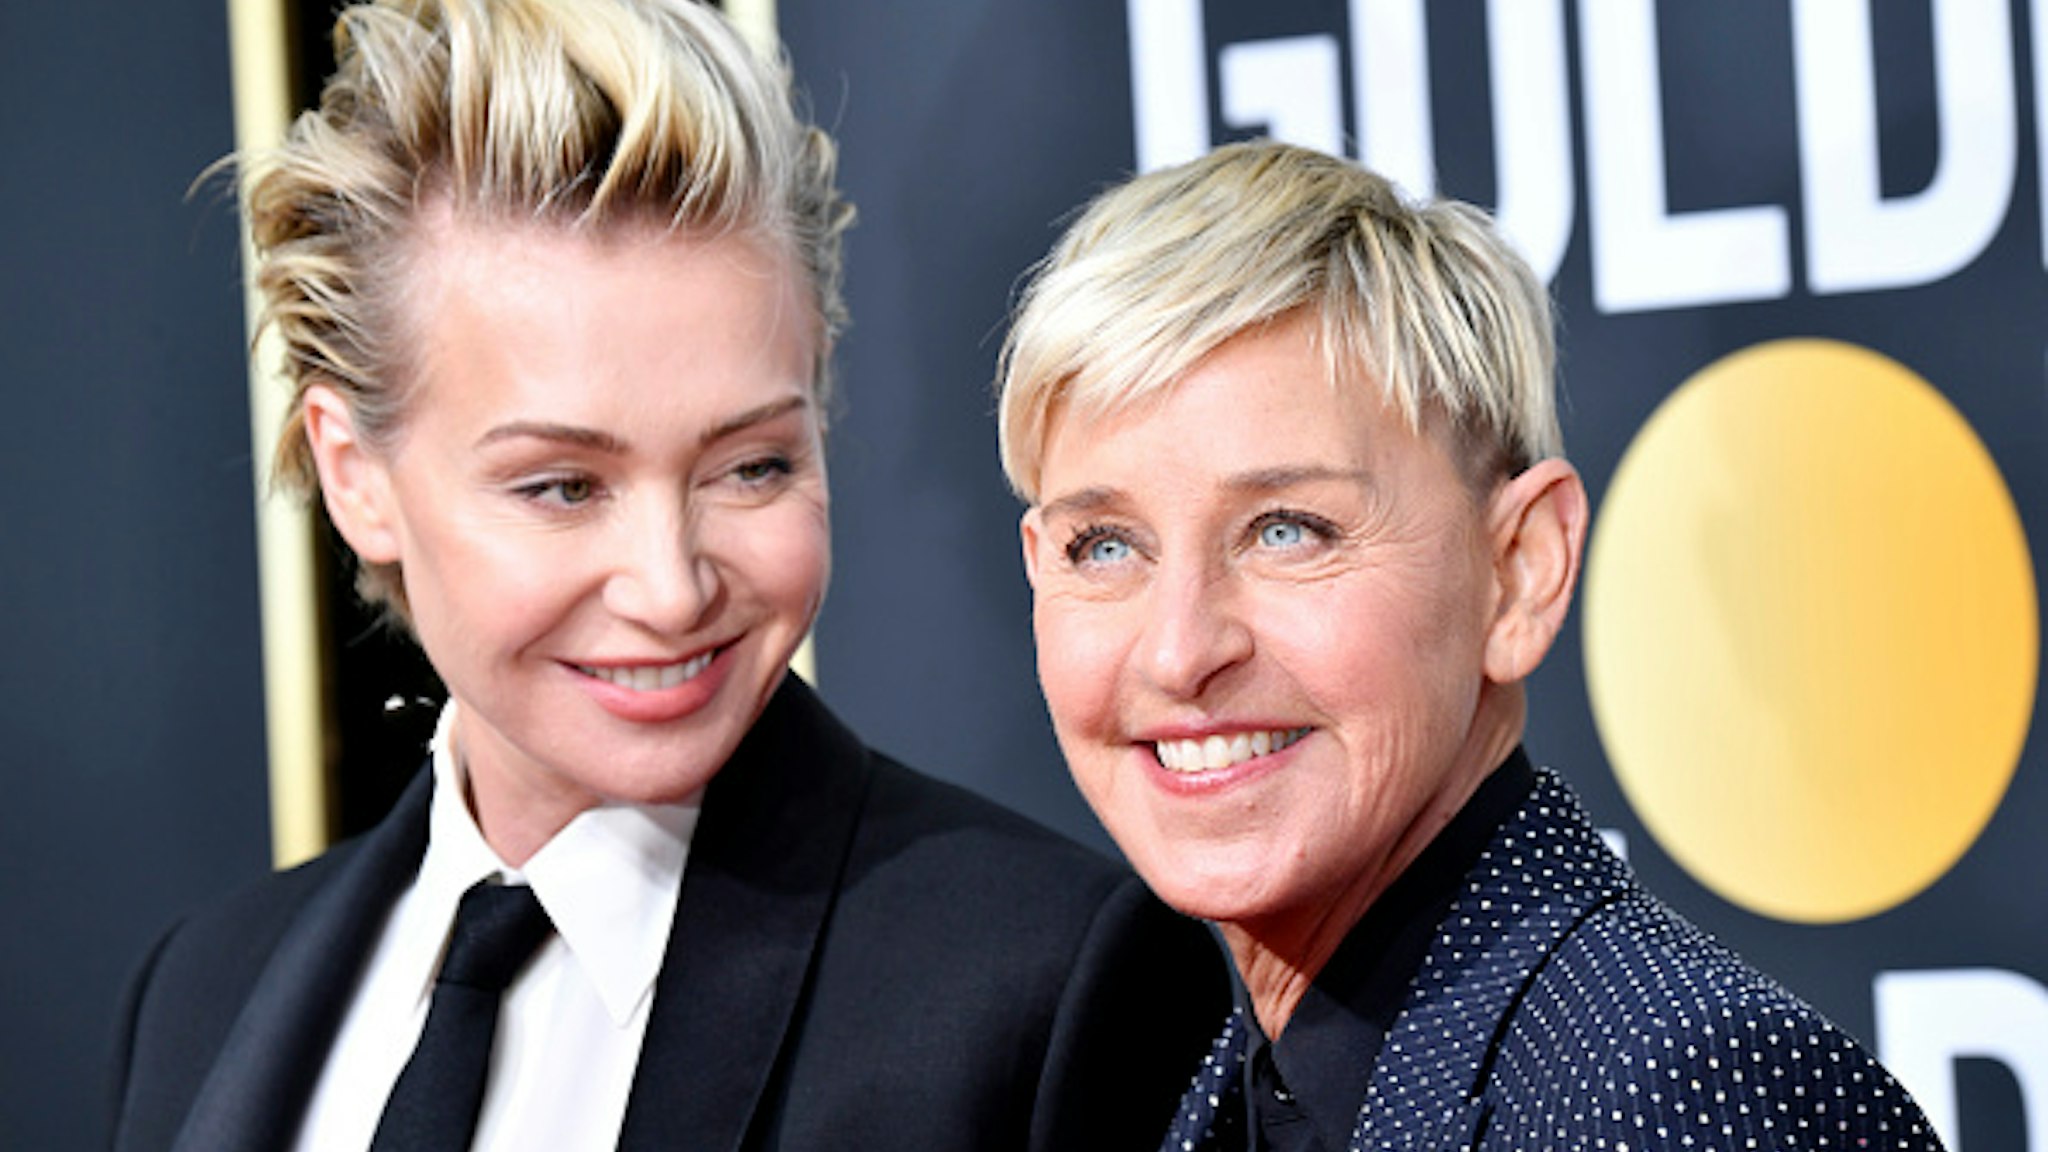 BEVERLY HILLS, CALIFORNIA - JANUARY 05: (L-R) Portia de Rossi and Ellen DeGeneres attends the 77th Annual Golden Globe Awards at The Beverly Hilton Hotel on January 05, 2020 in Beverly Hills, California.